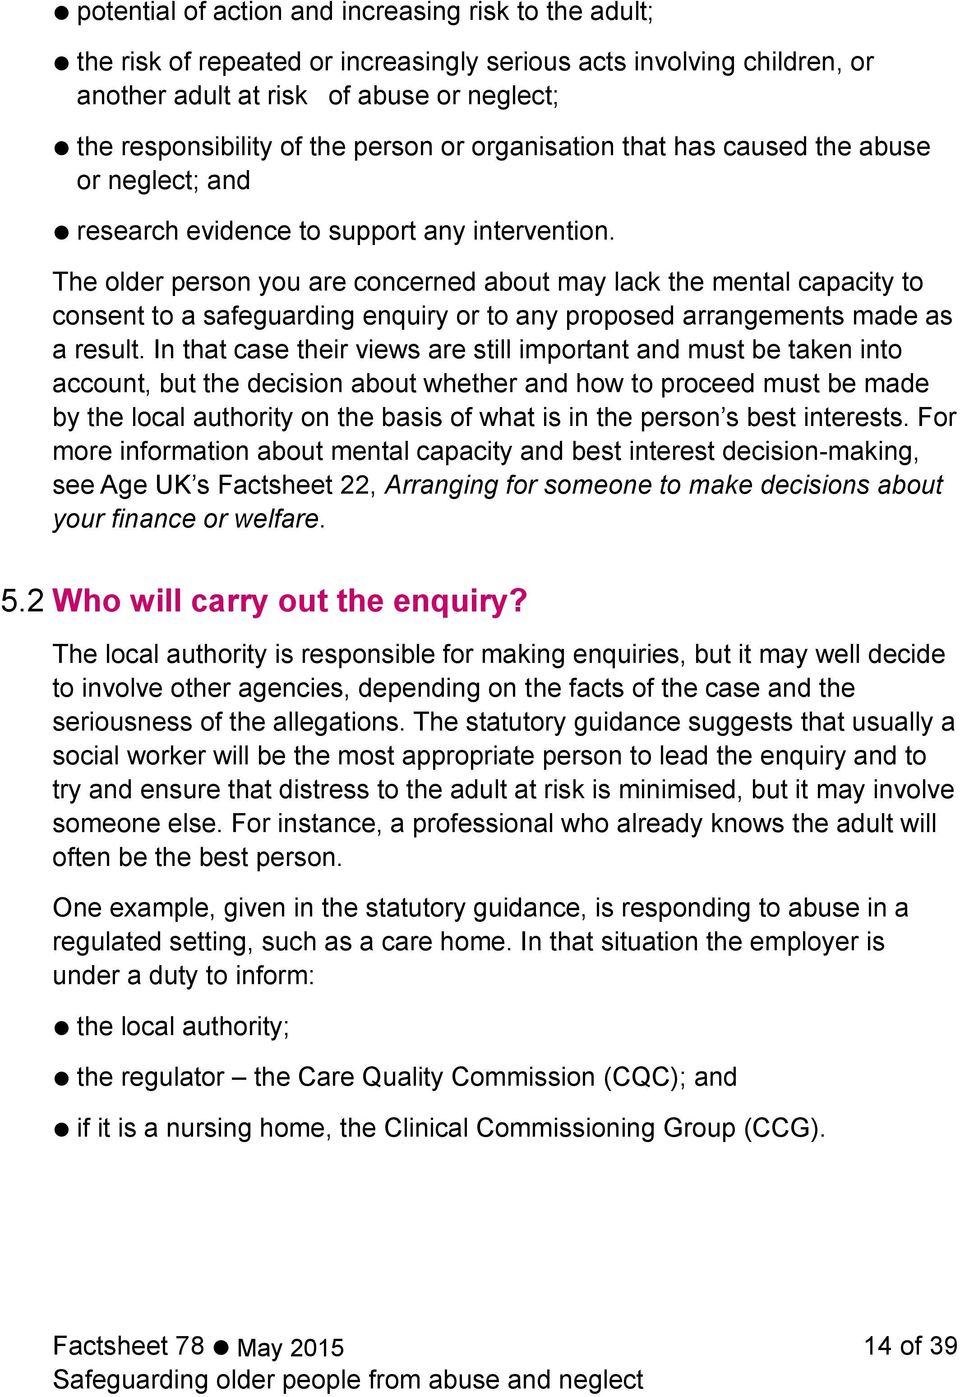 The older person you are concerned about may lack the mental capacity to consent to a safeguarding enquiry or to any proposed arrangements made as a result.